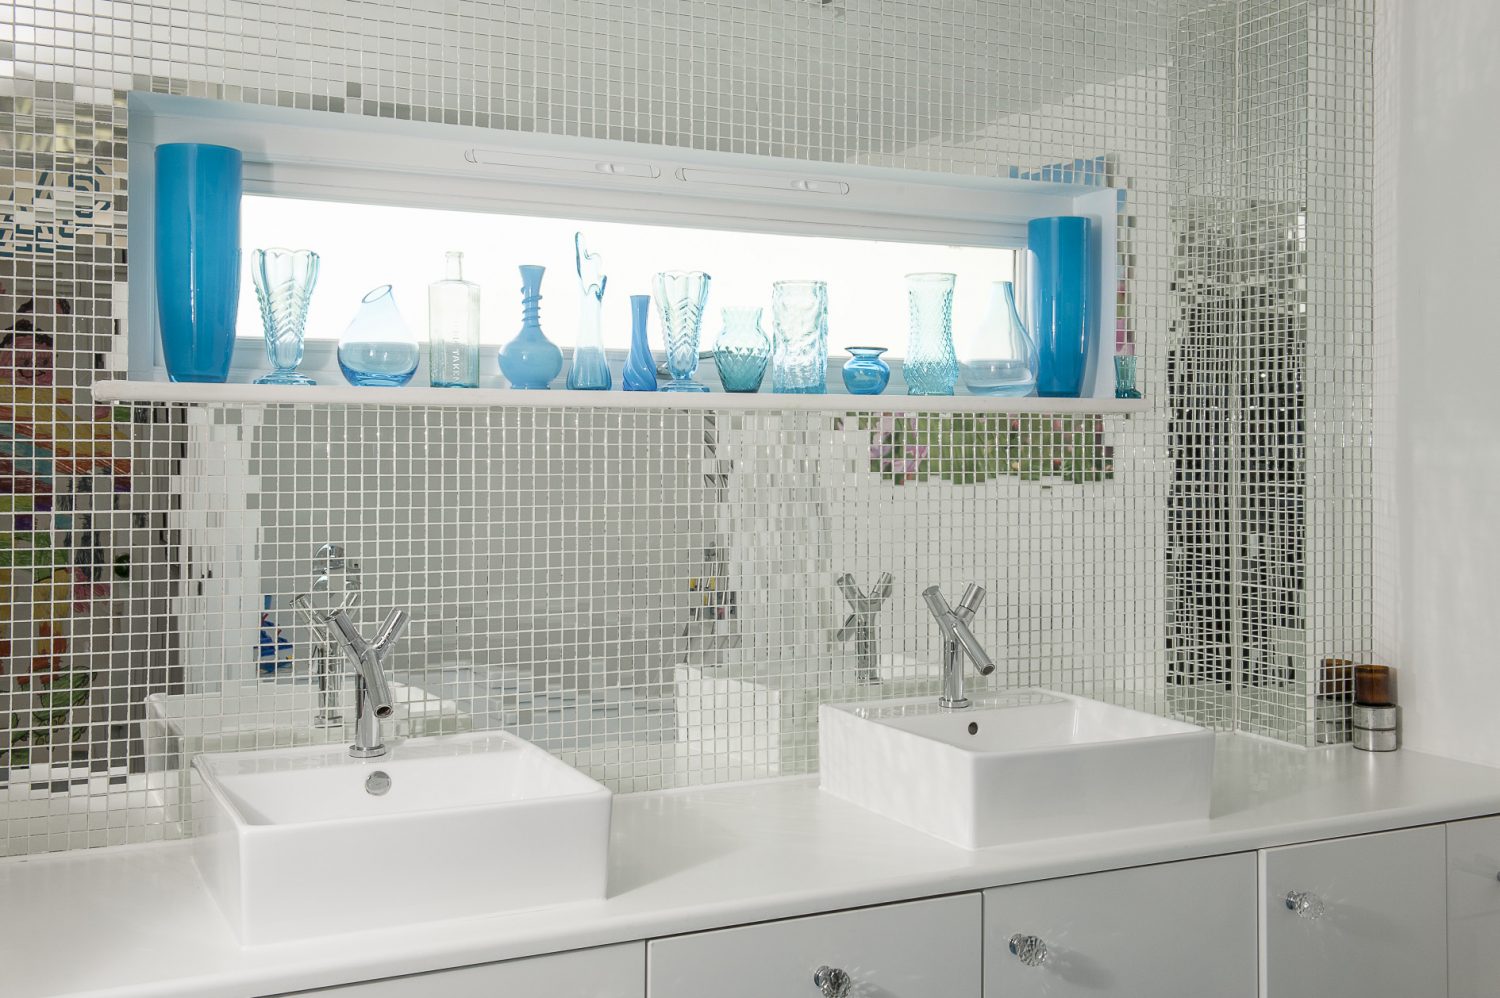 Like the downstairs loo, the rear wall of the family bathroom is tiled with mirrored mosaics